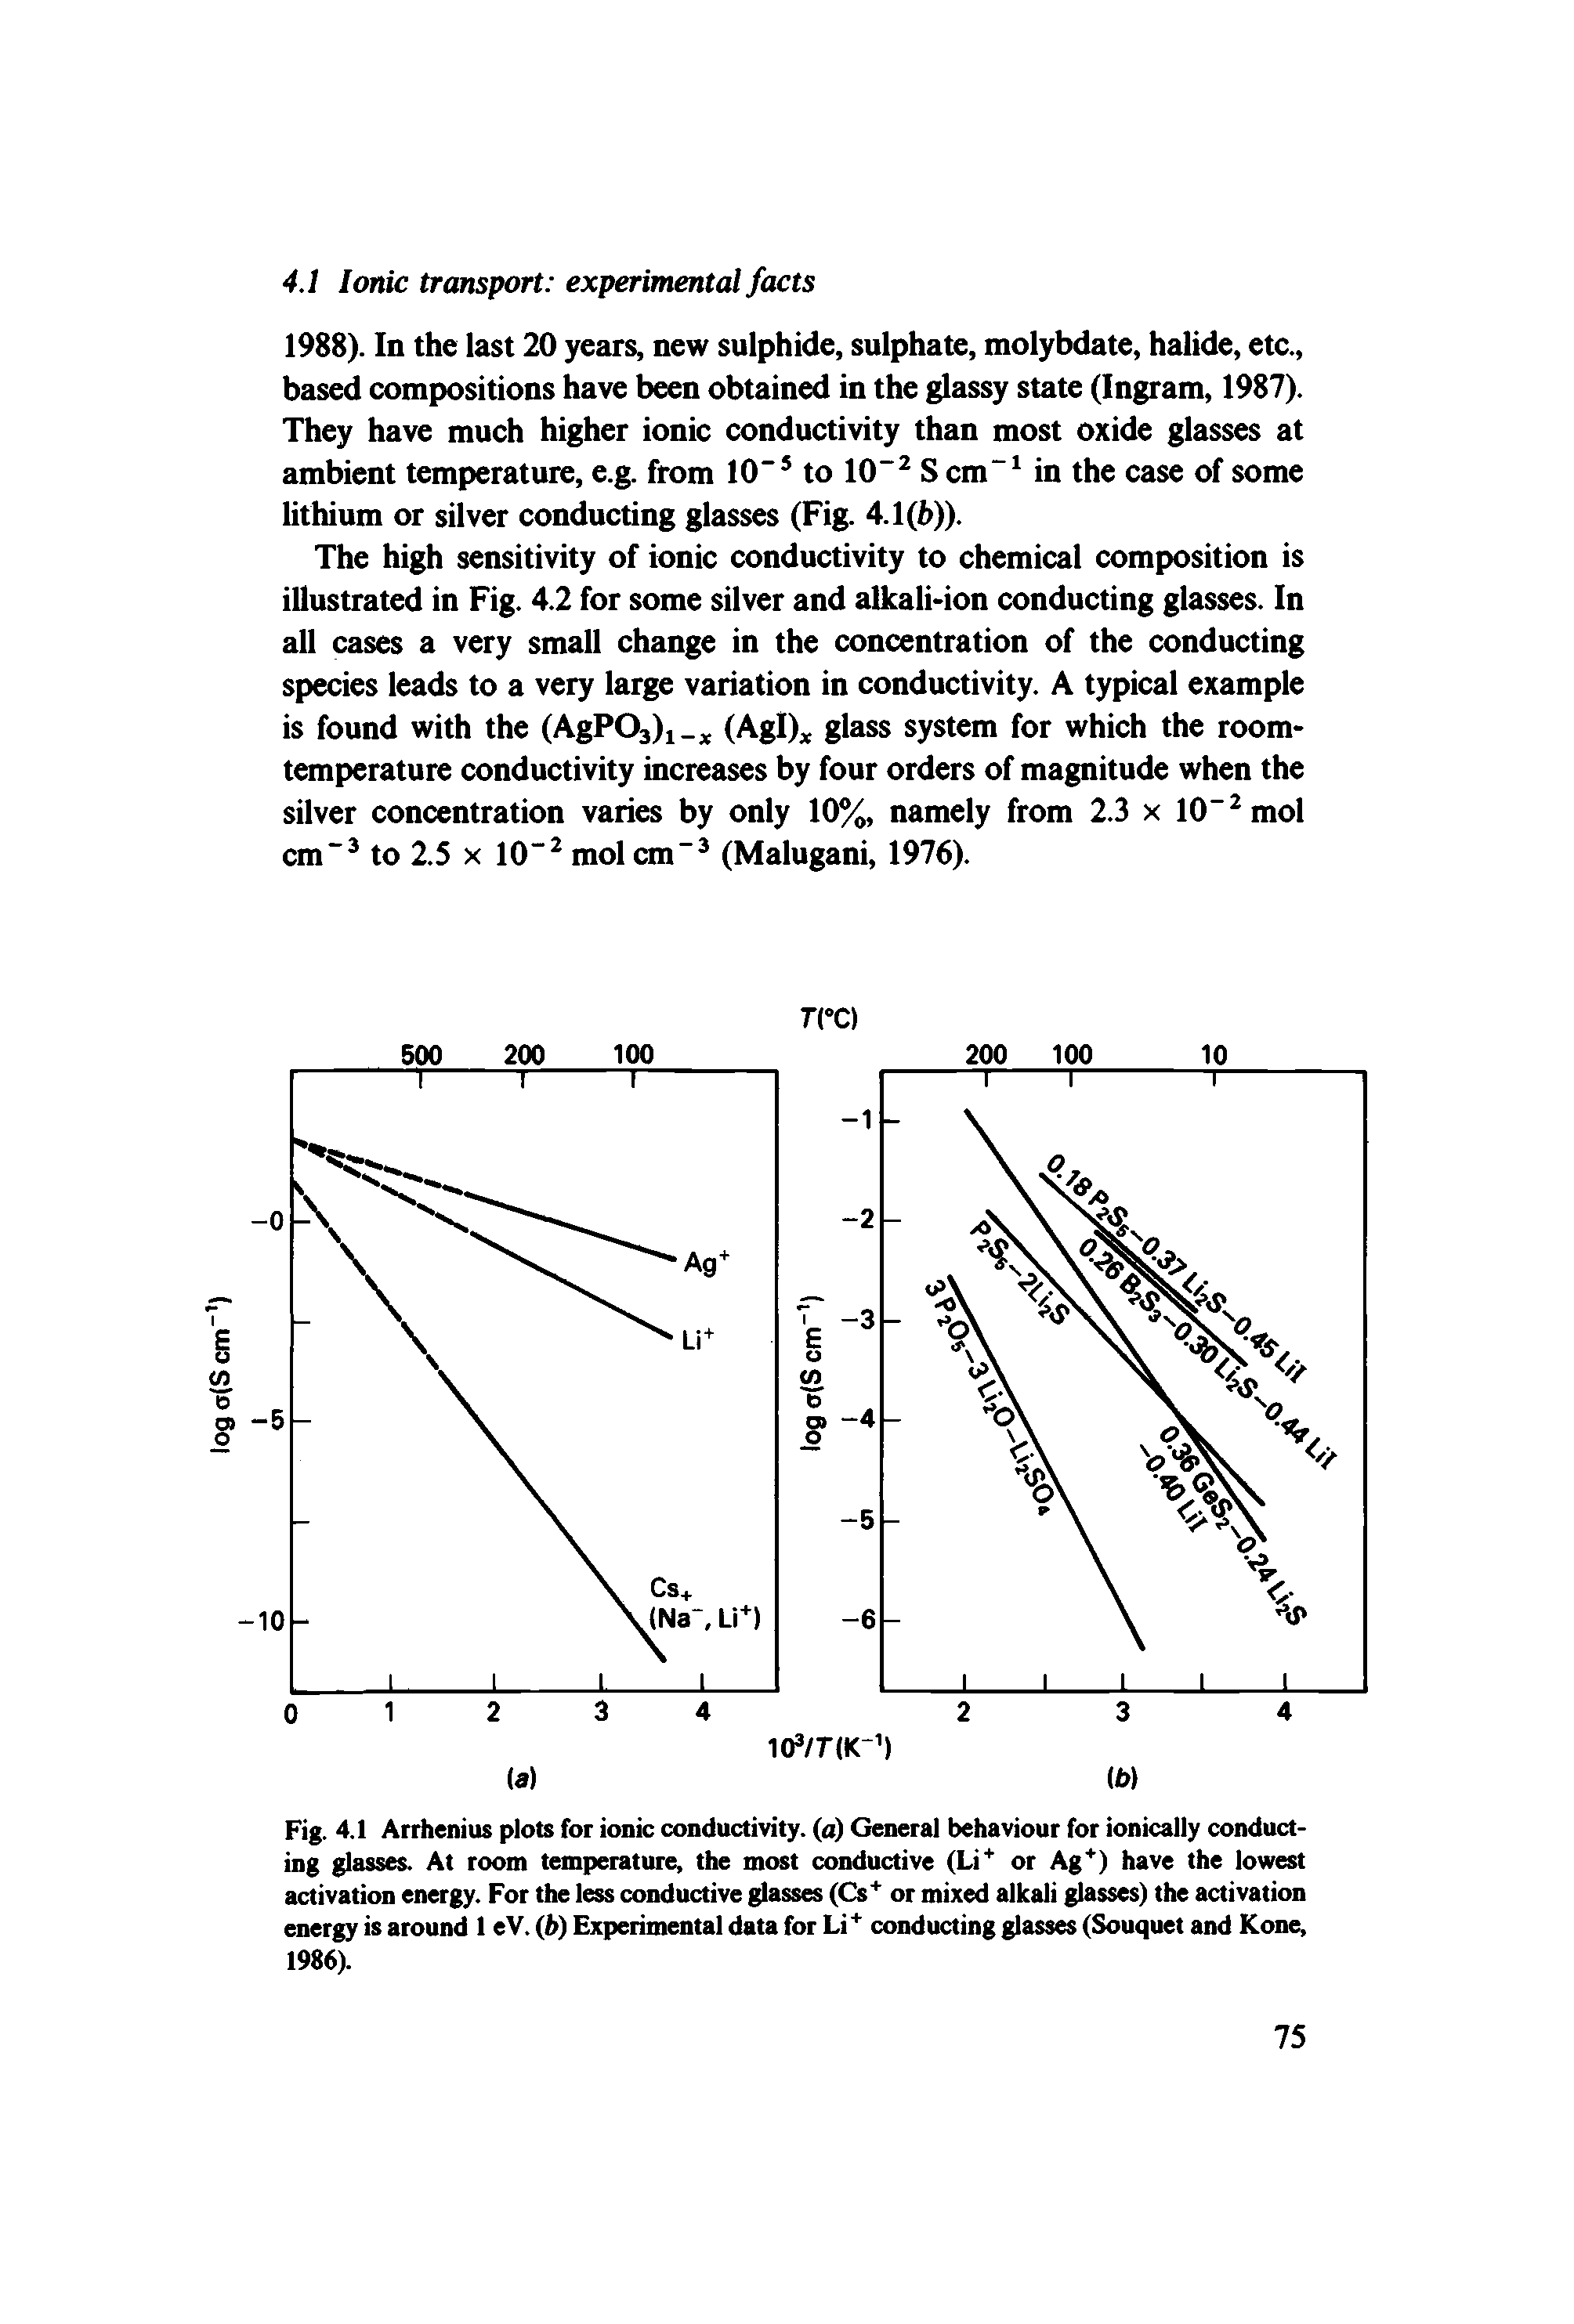 Fig. 4.1 Arrhenius plots for ionic conductivity, (a) General behaviour for ionically conducting glasses. At room temperature, the most conductive (Li or Ag ) have the lowest activation energy. For the less conductive glasses (Cs or mixed alkali glasses) the activation energy is around 1 eV. (b) Experimental data for Li conducting glasses (Souquet and Kone, 1986).